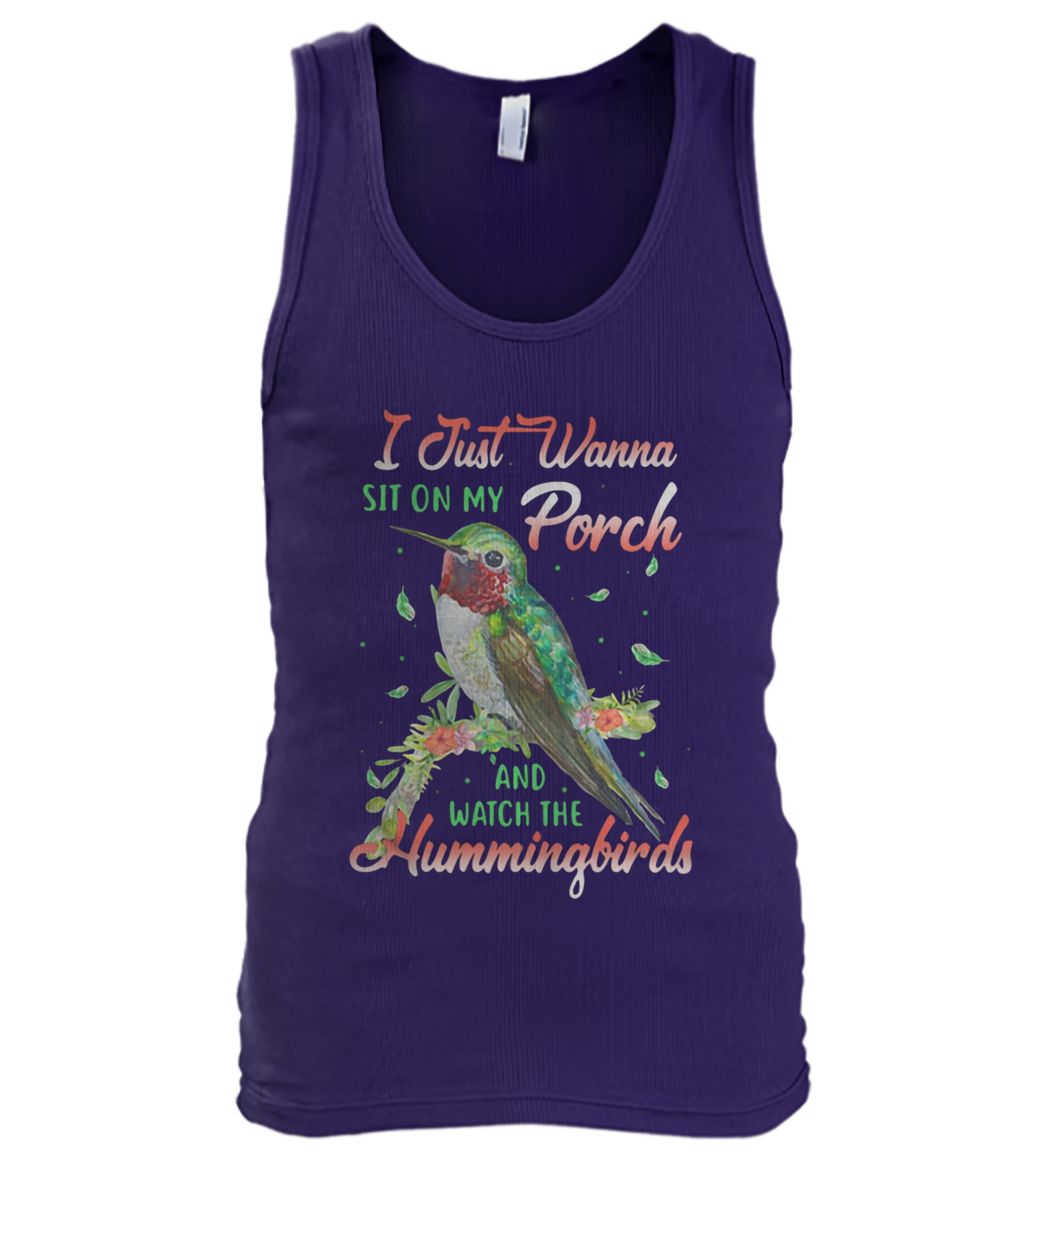 I just wanna sit on my porch and watch the hummingbirds men's tank top